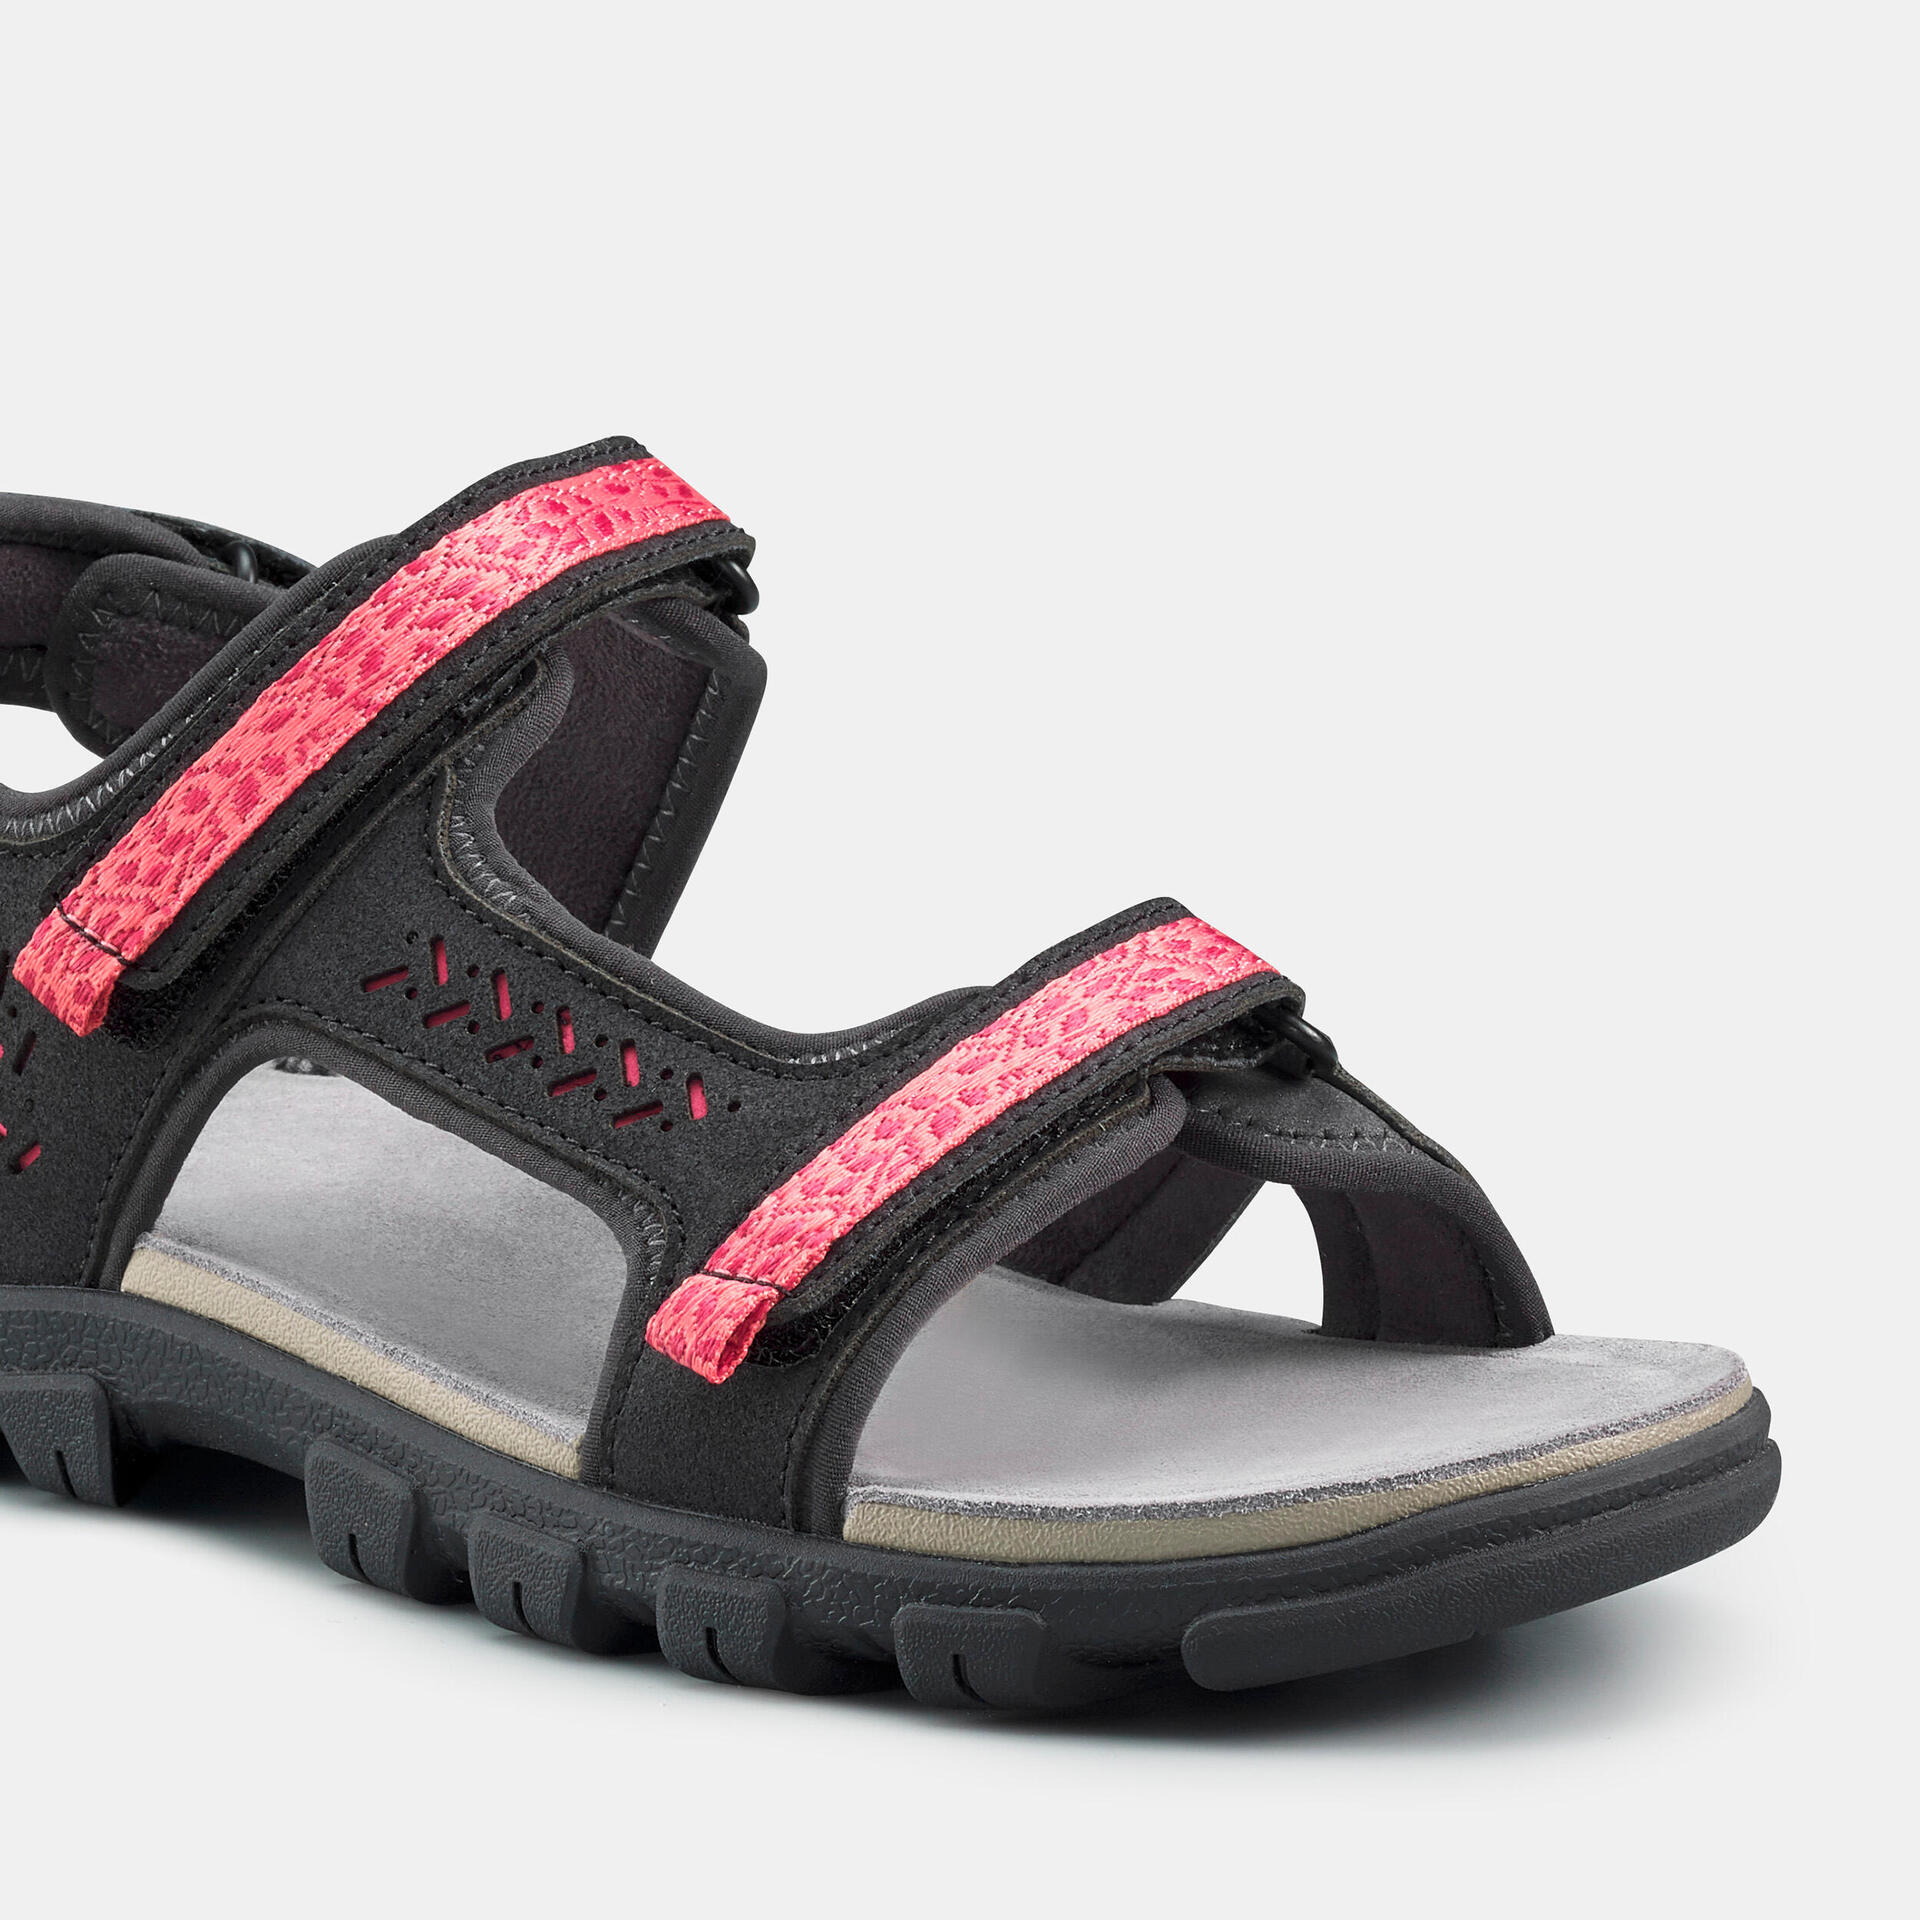 Choosing hiking sandals for women with sensitive feet